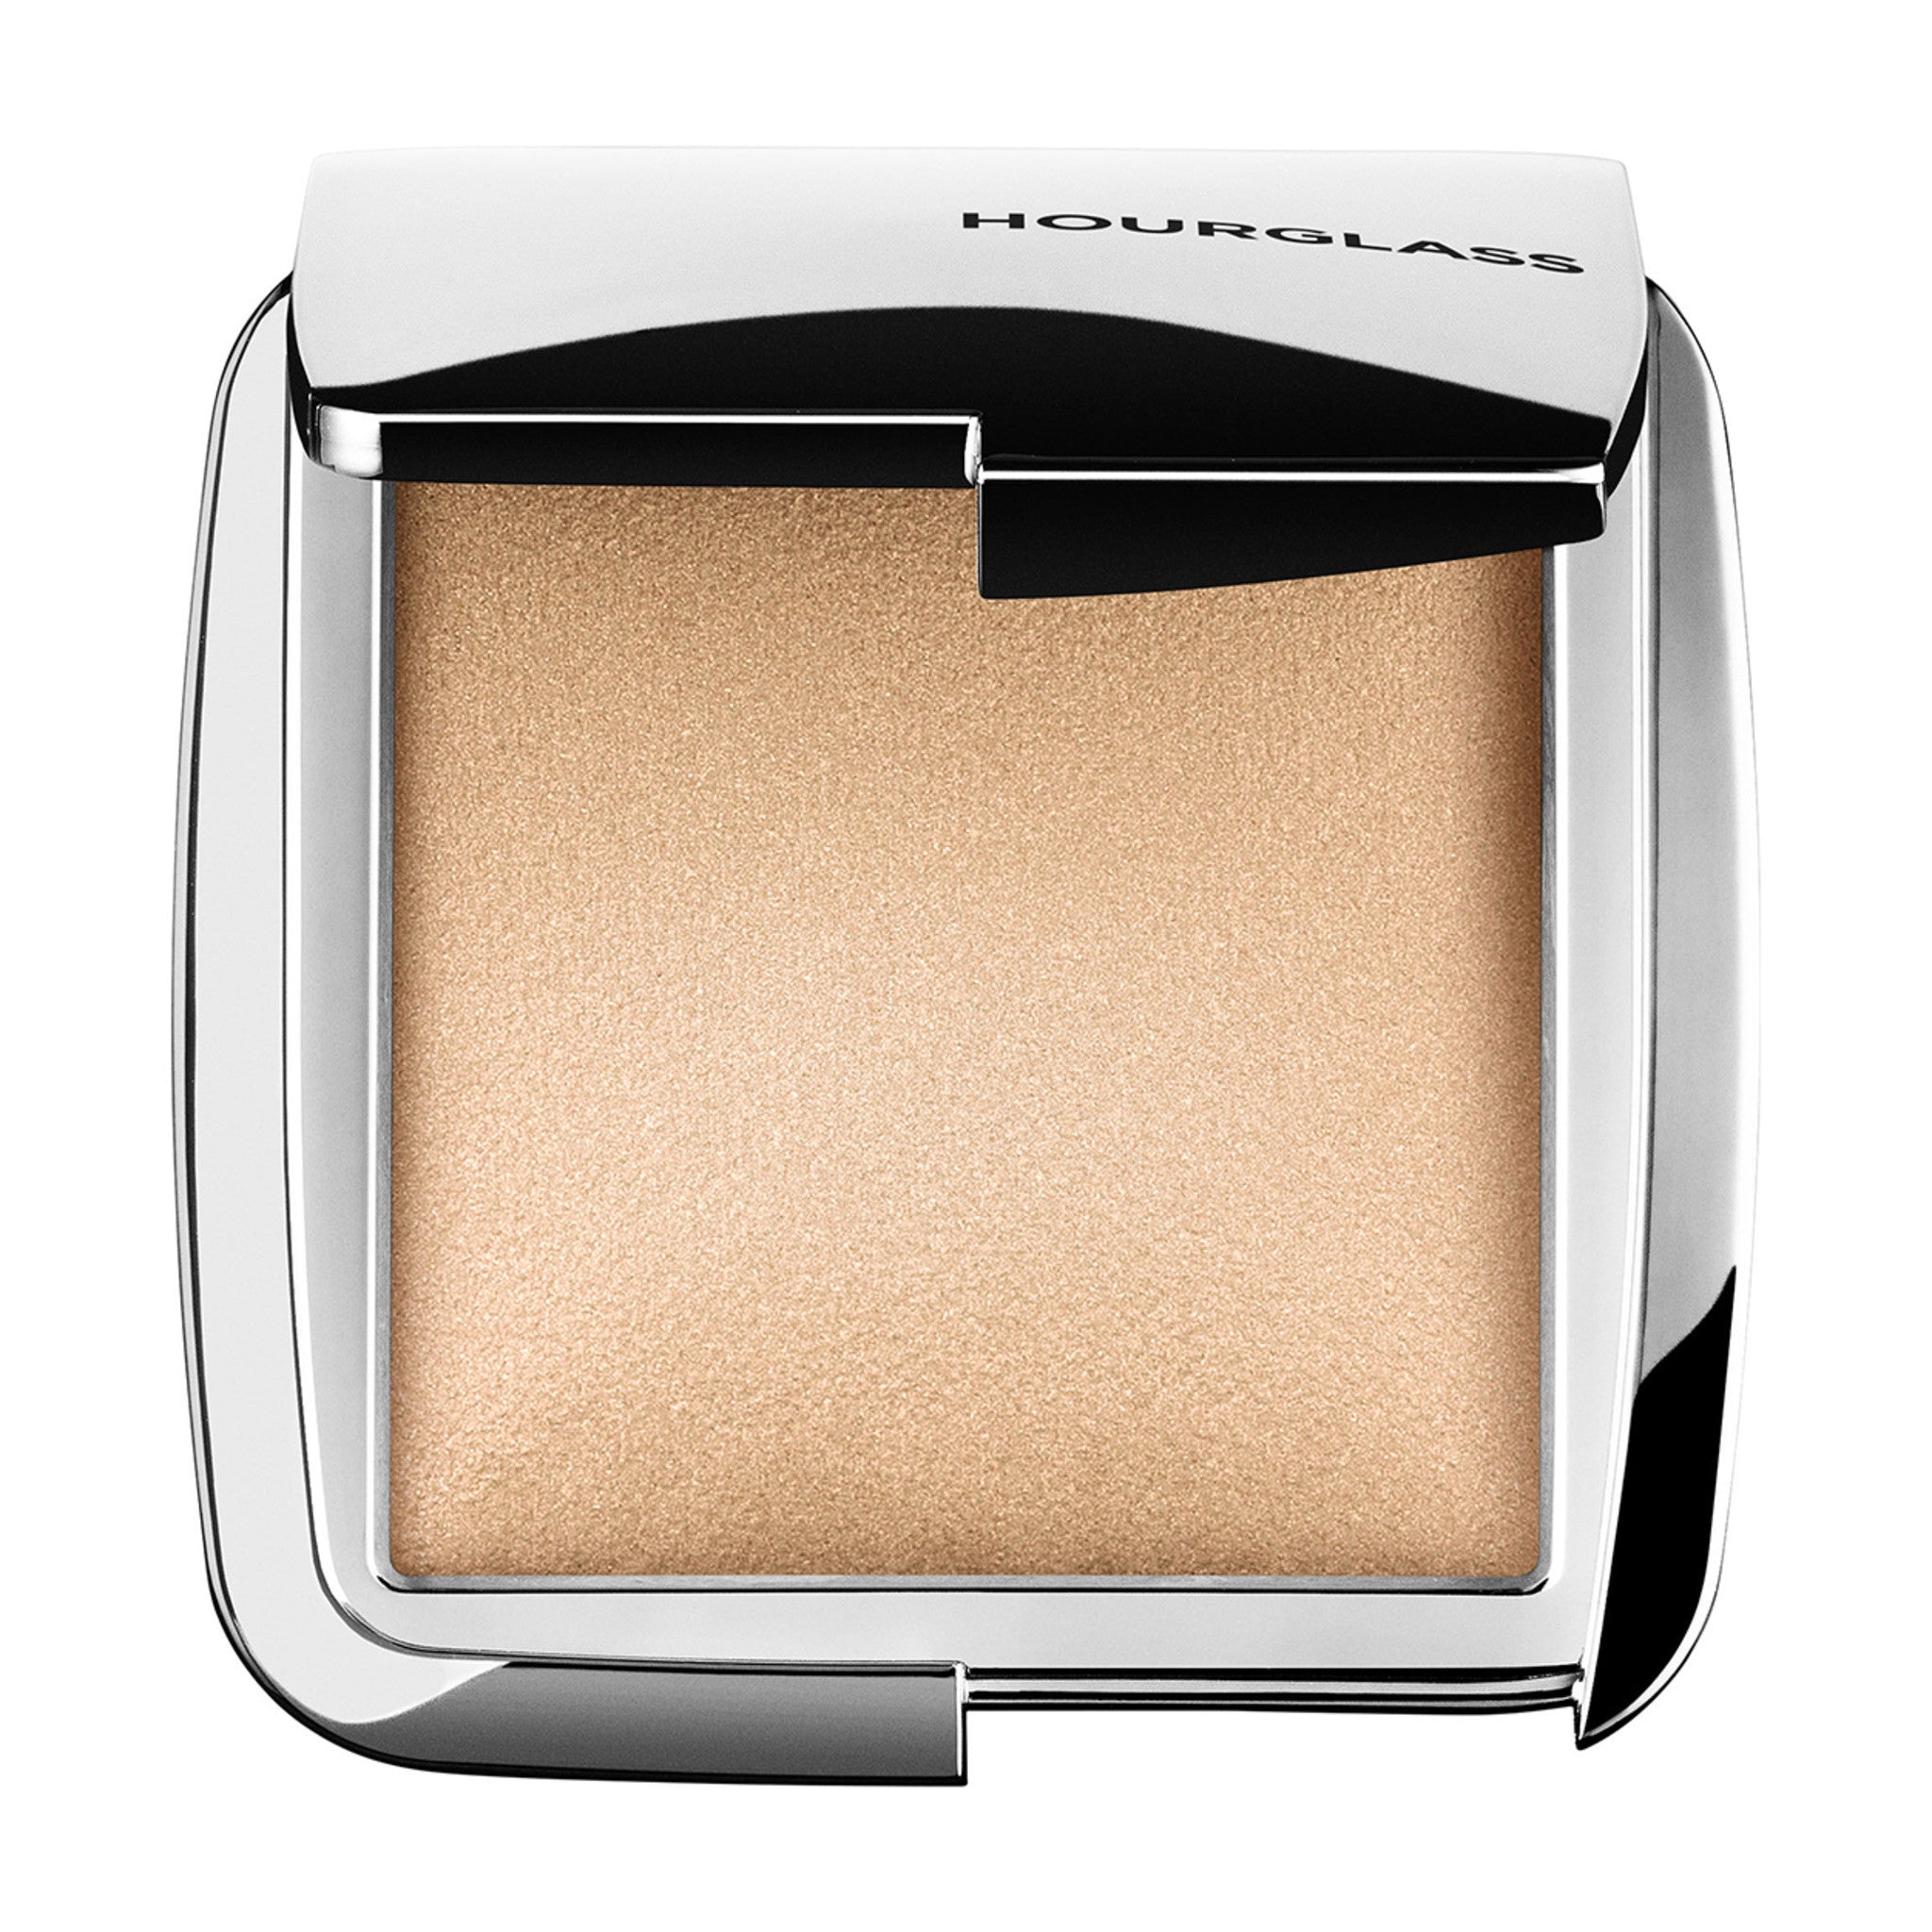 Hourglass Ambient Strobe Lighting Powder Color/Shade variant: Brilliant main image. This product is in the color nude